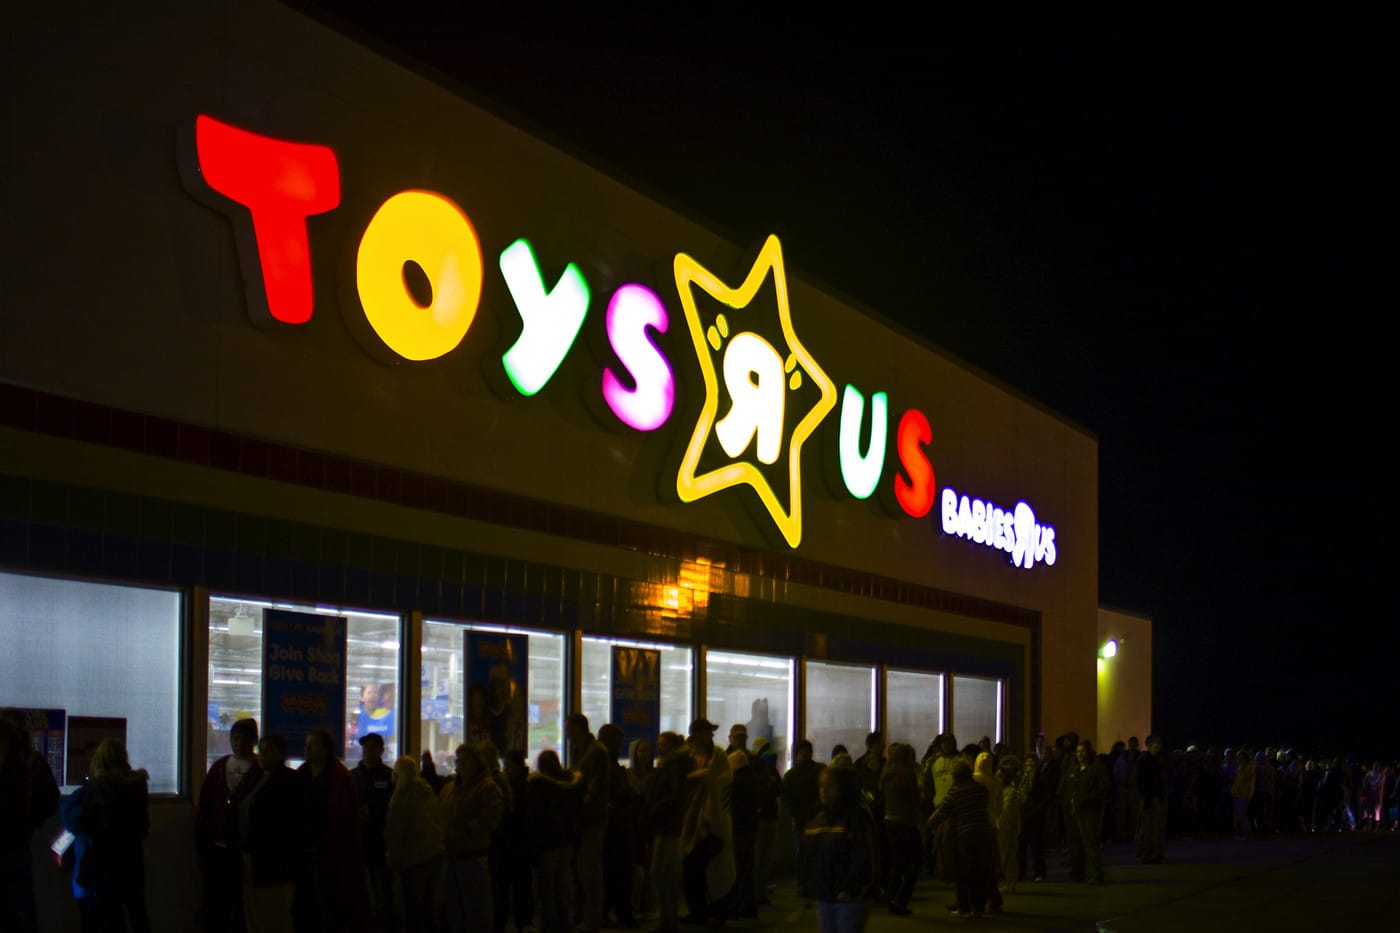 news about toys r us